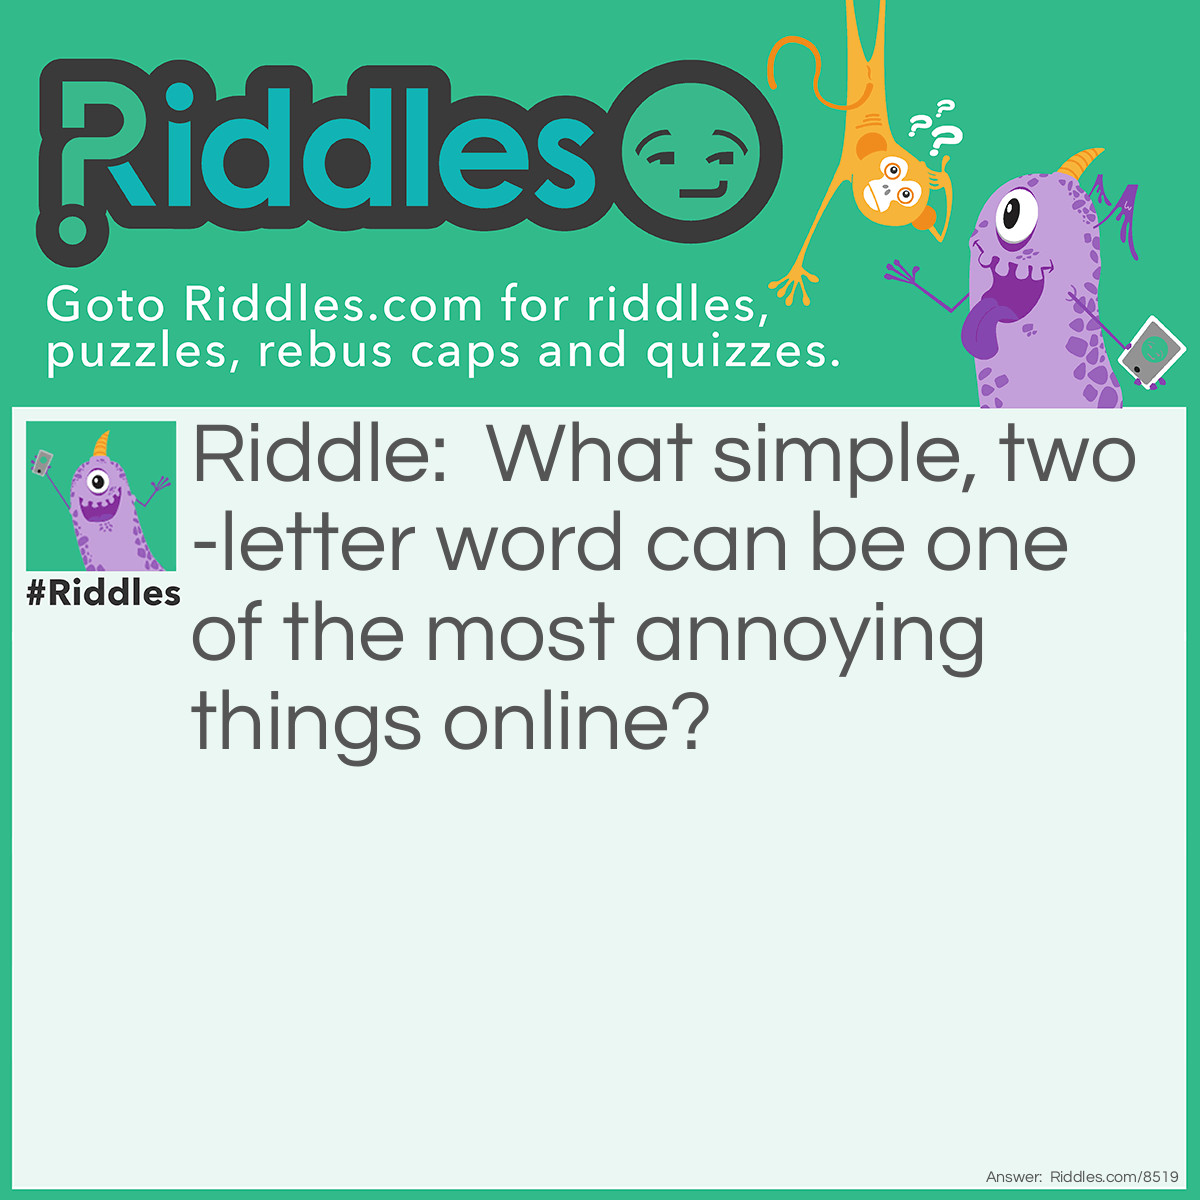 Riddle: What simple, two-letter word can be one of the most annoying things online? Answer: An AD!